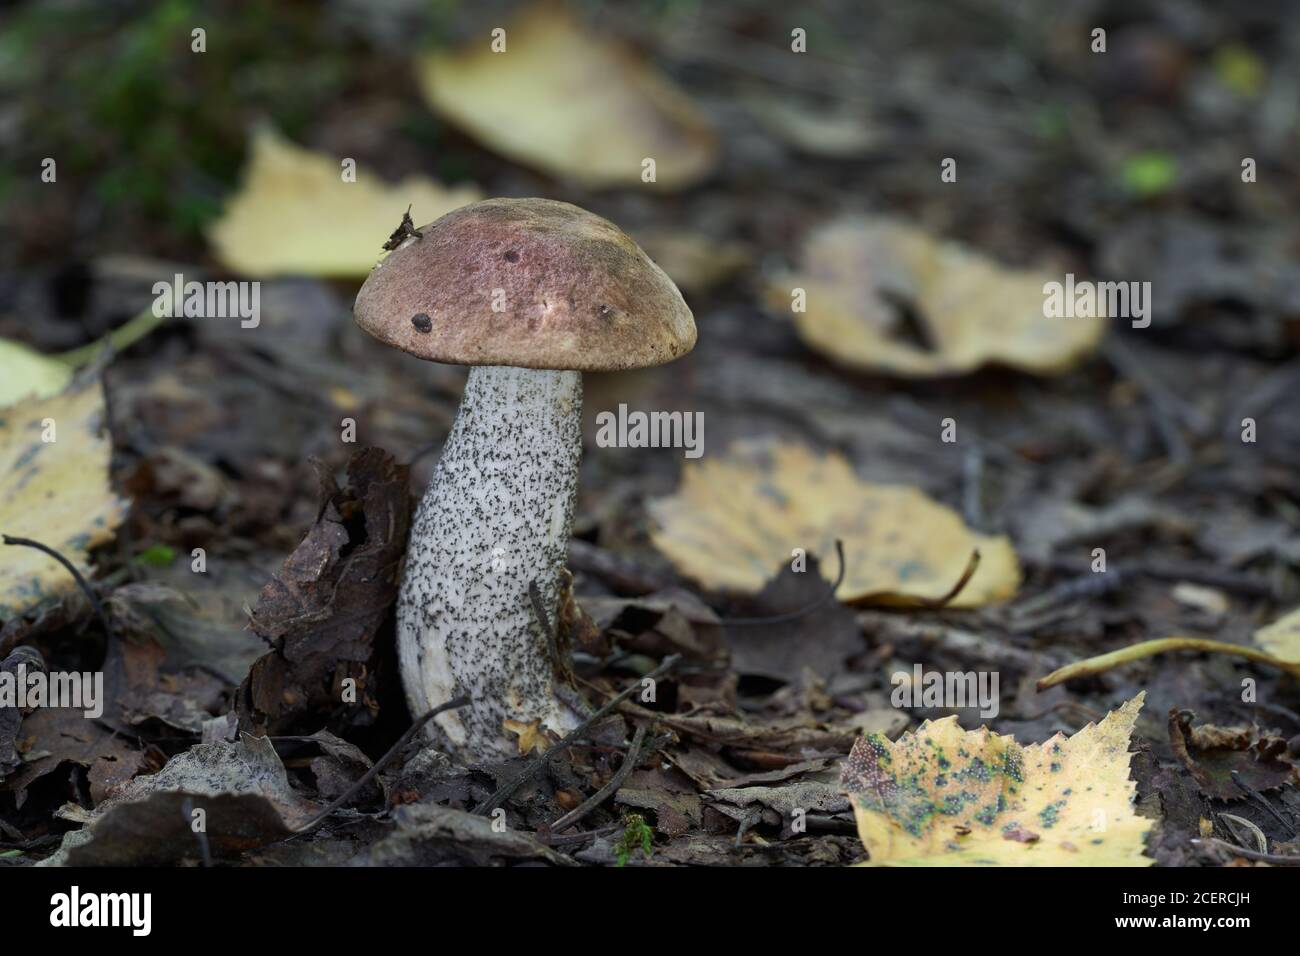 Edible mushroom Leccinum scabrum in the bich forest. Known as birch bolete. Wild mushroom with brown cap growing in the leaves. Stock Photo